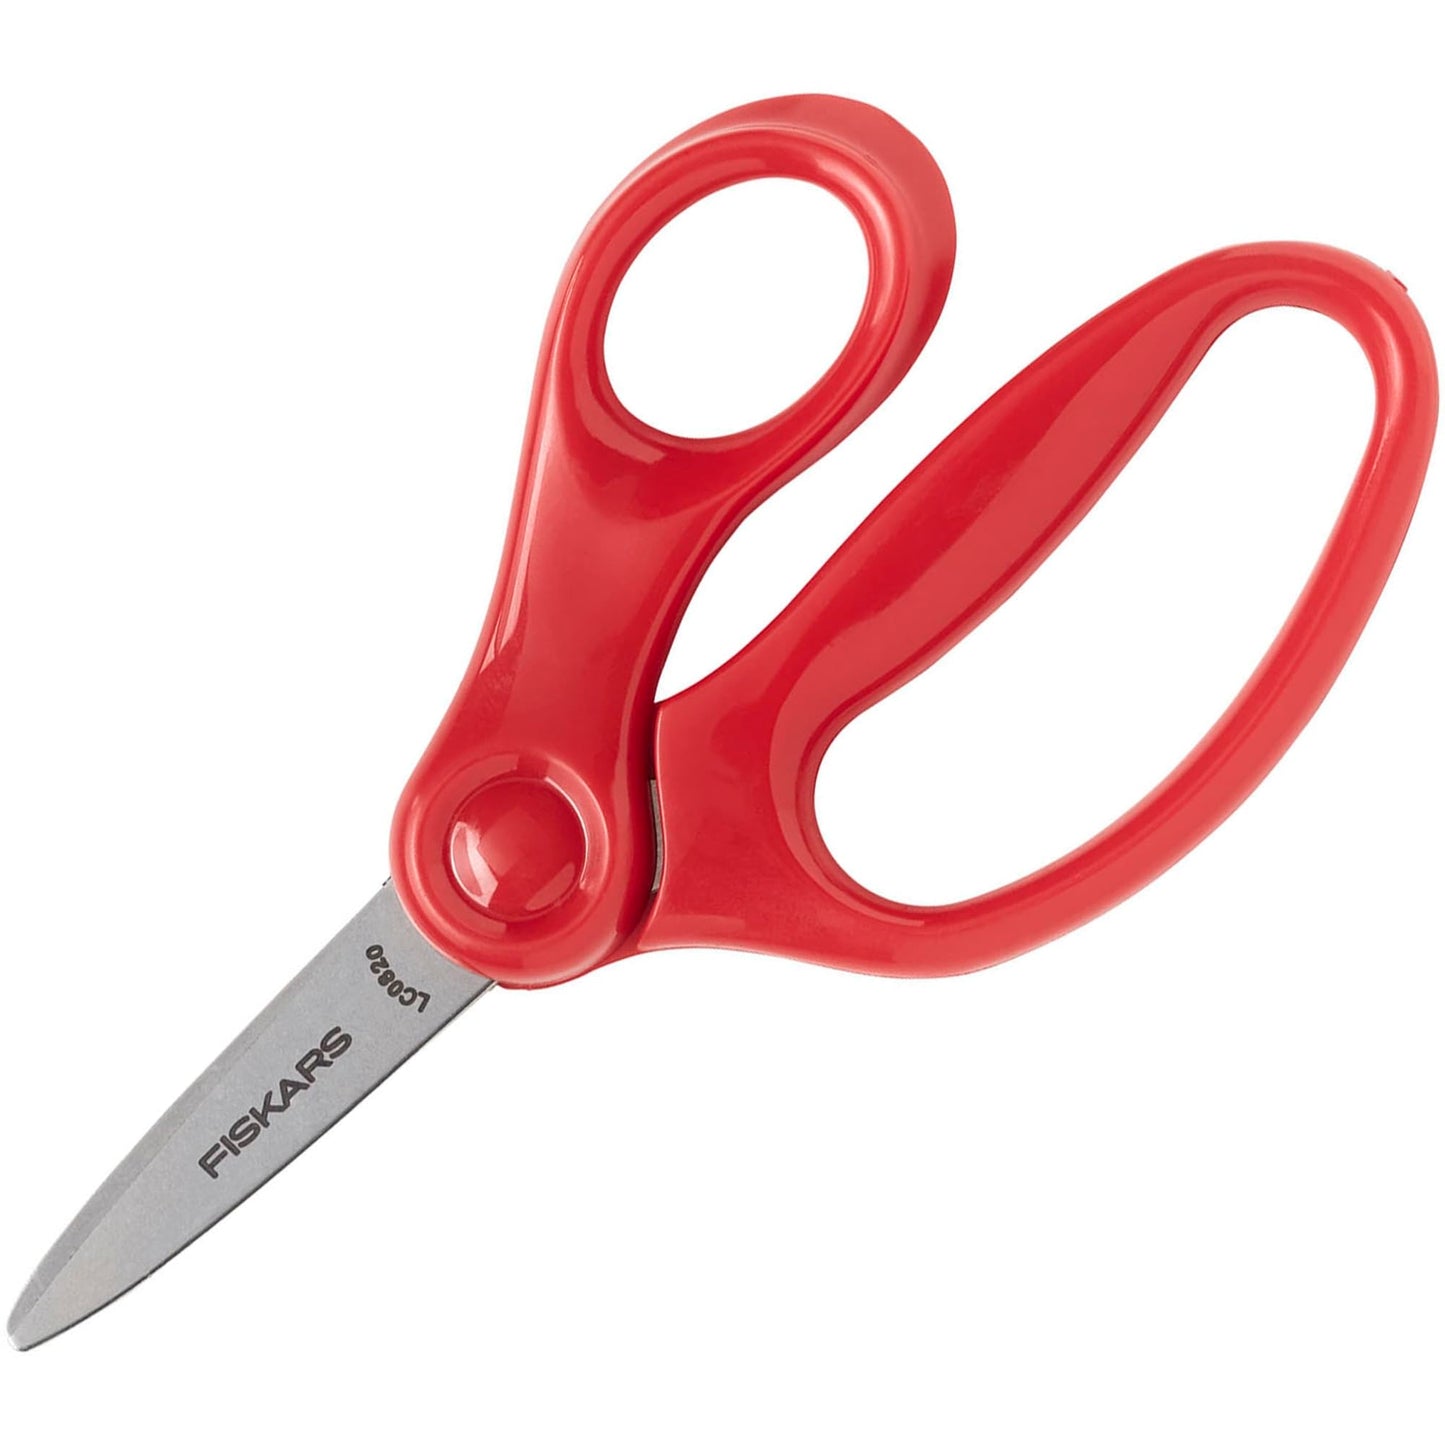 Fiskars 5" Pointed-Tip Scissors for Kids 4+ - Scissors for School or Crafting - Back to School Supplies - Color May Vary